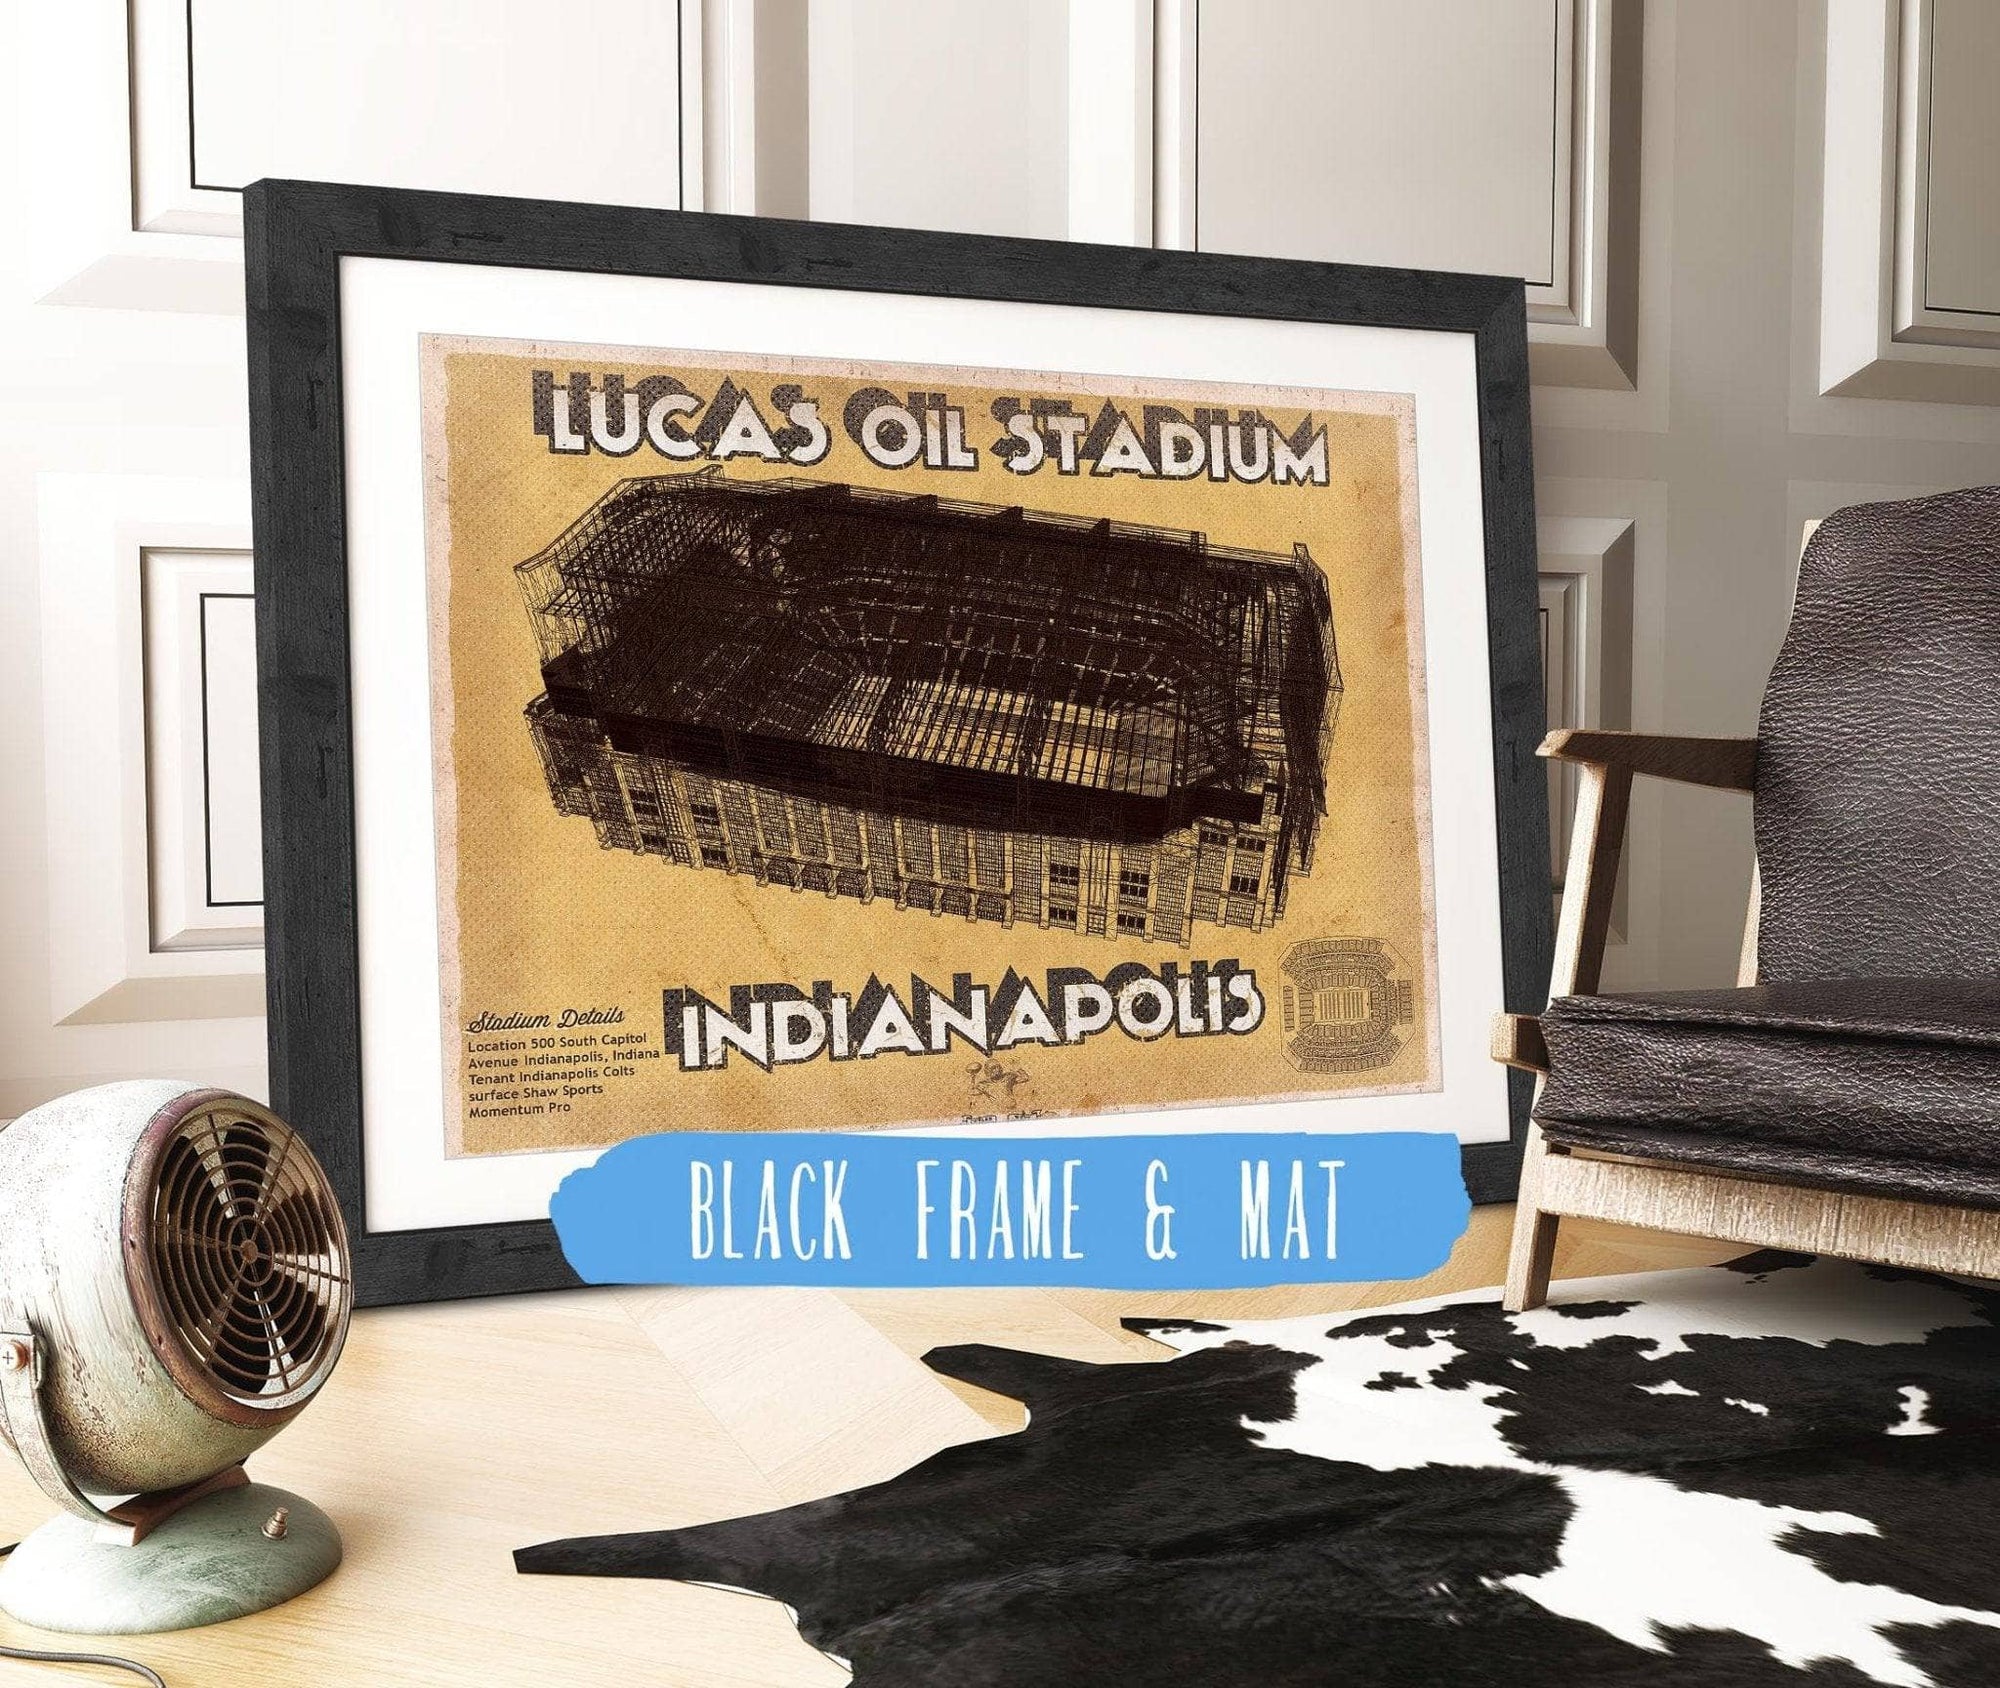 Cutler West Pro Football Collection 14" x 11" / Black Frame & Mat Indianapolis Colts Lucas Oil Stadium Vintage Football Print 700666450_64974